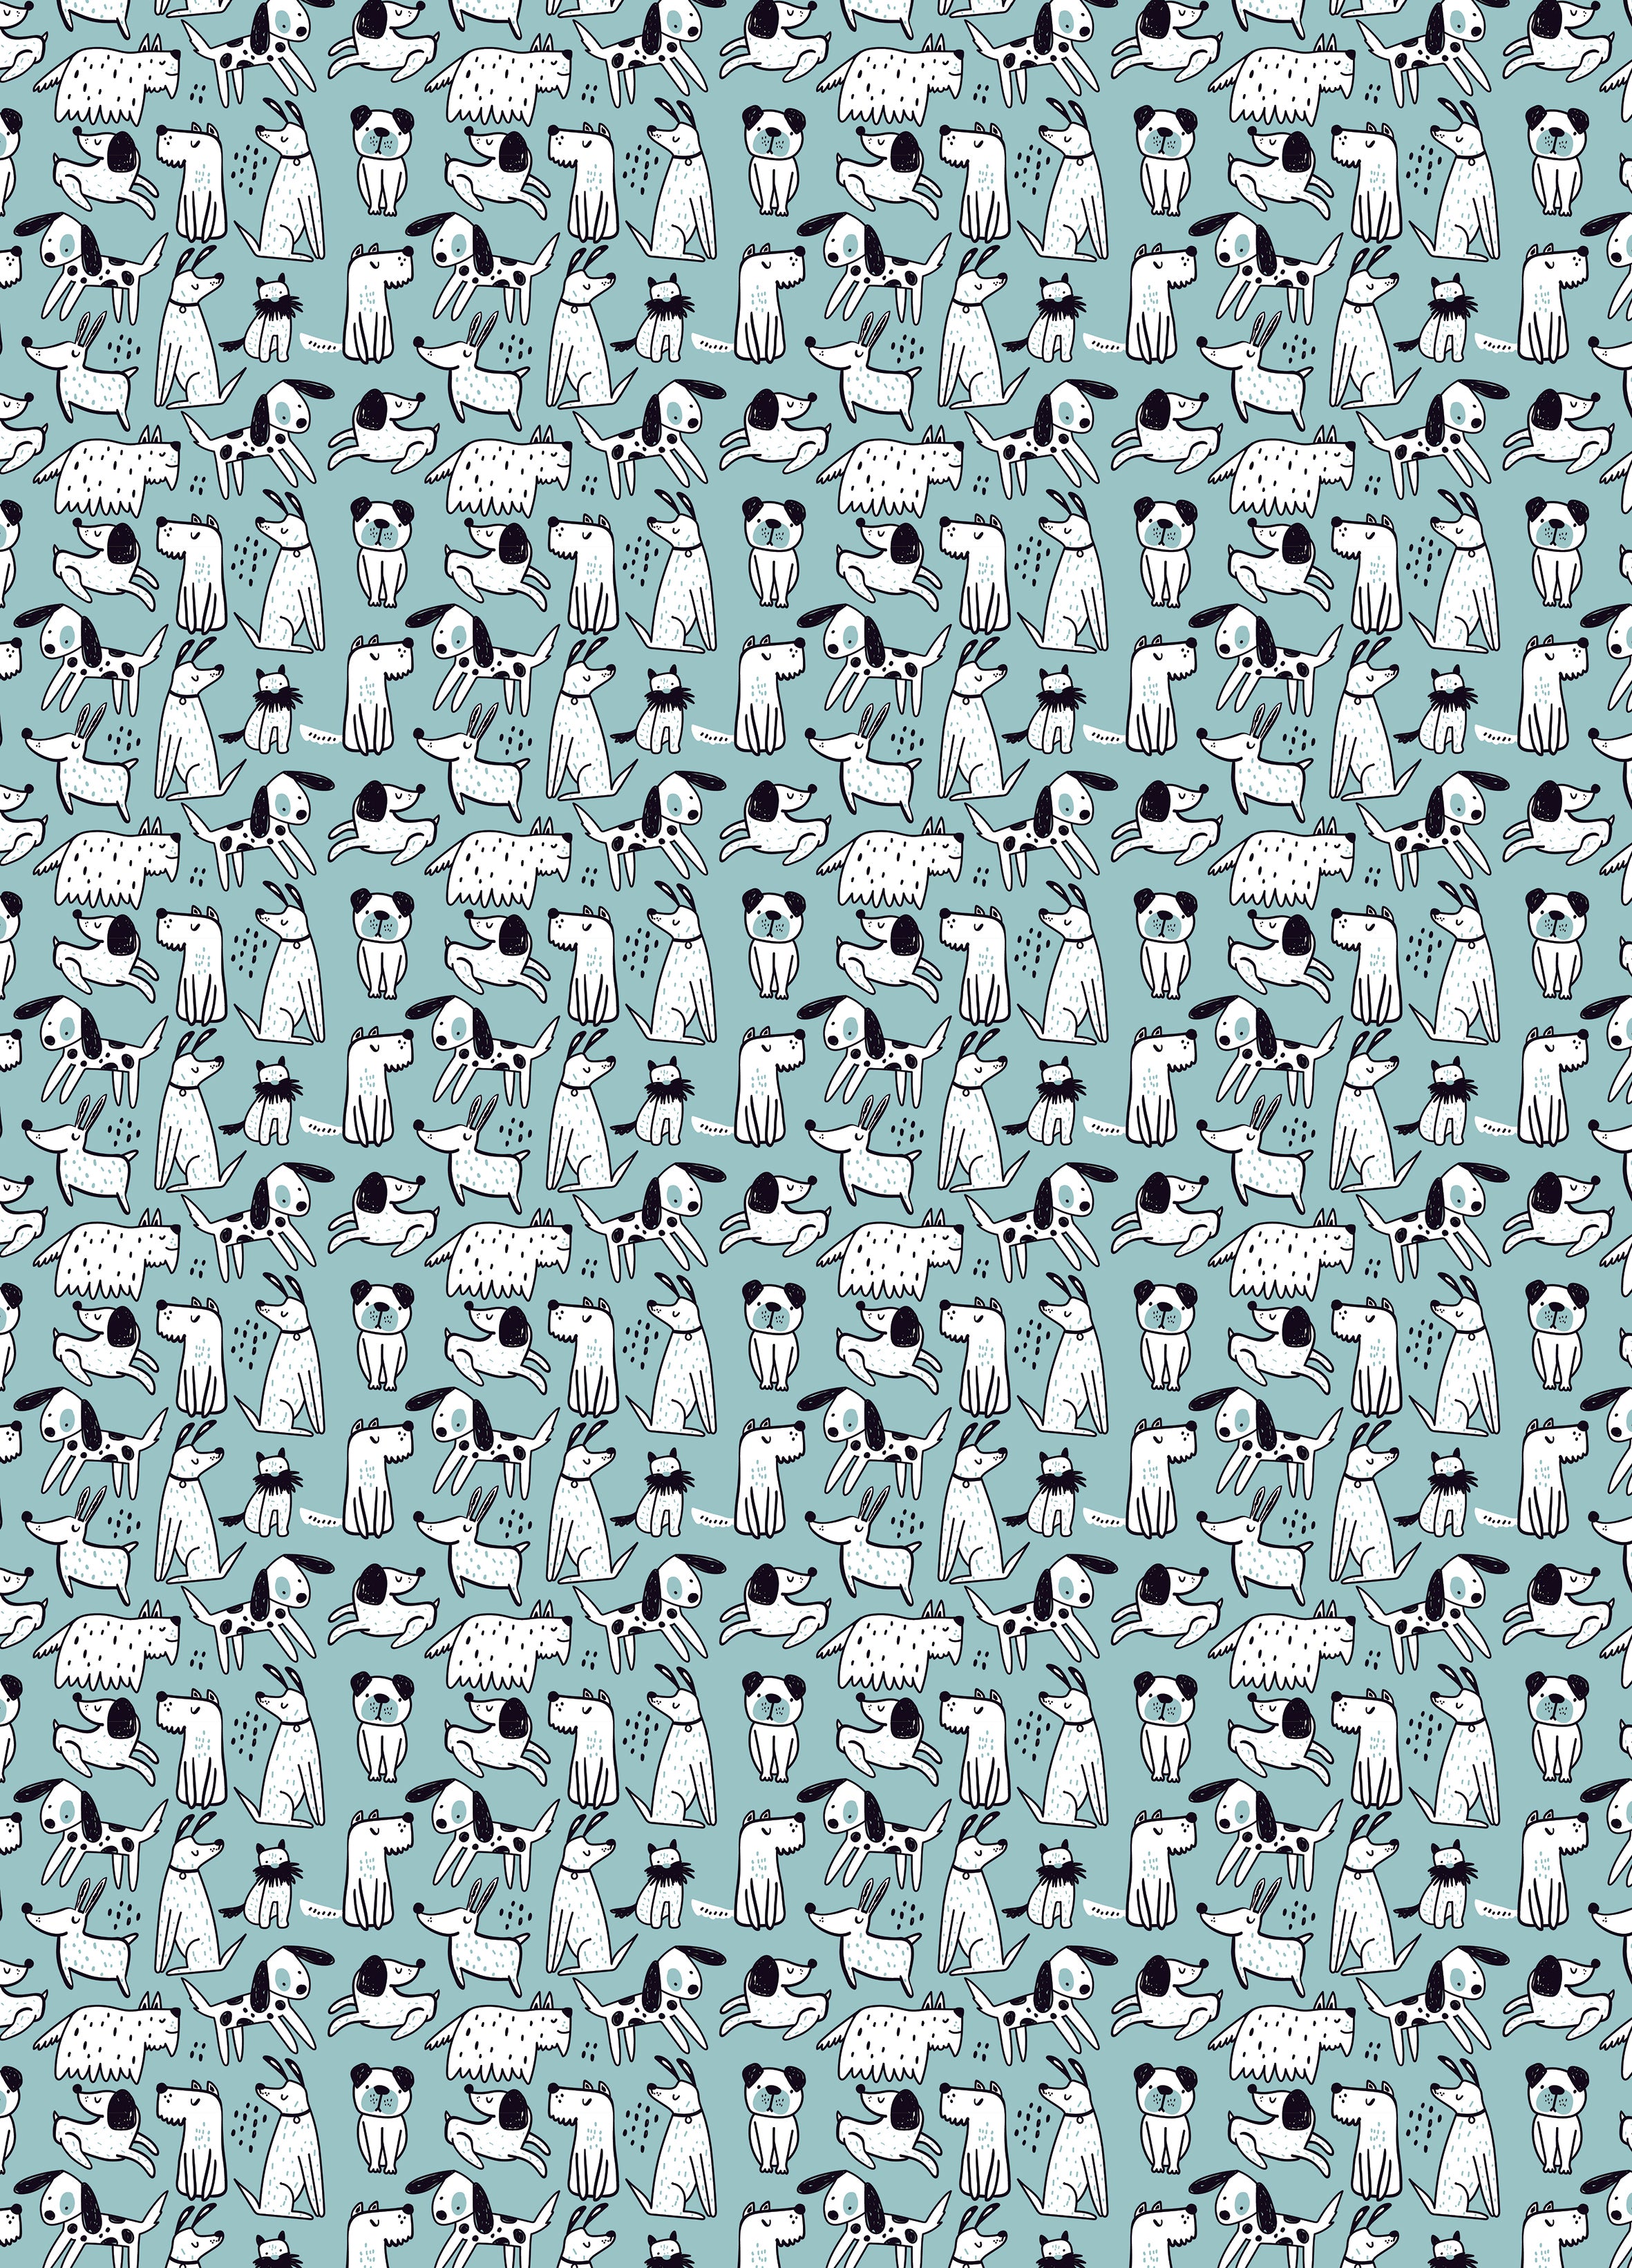 Black and white cartoon dogs on a mint green background wrap.